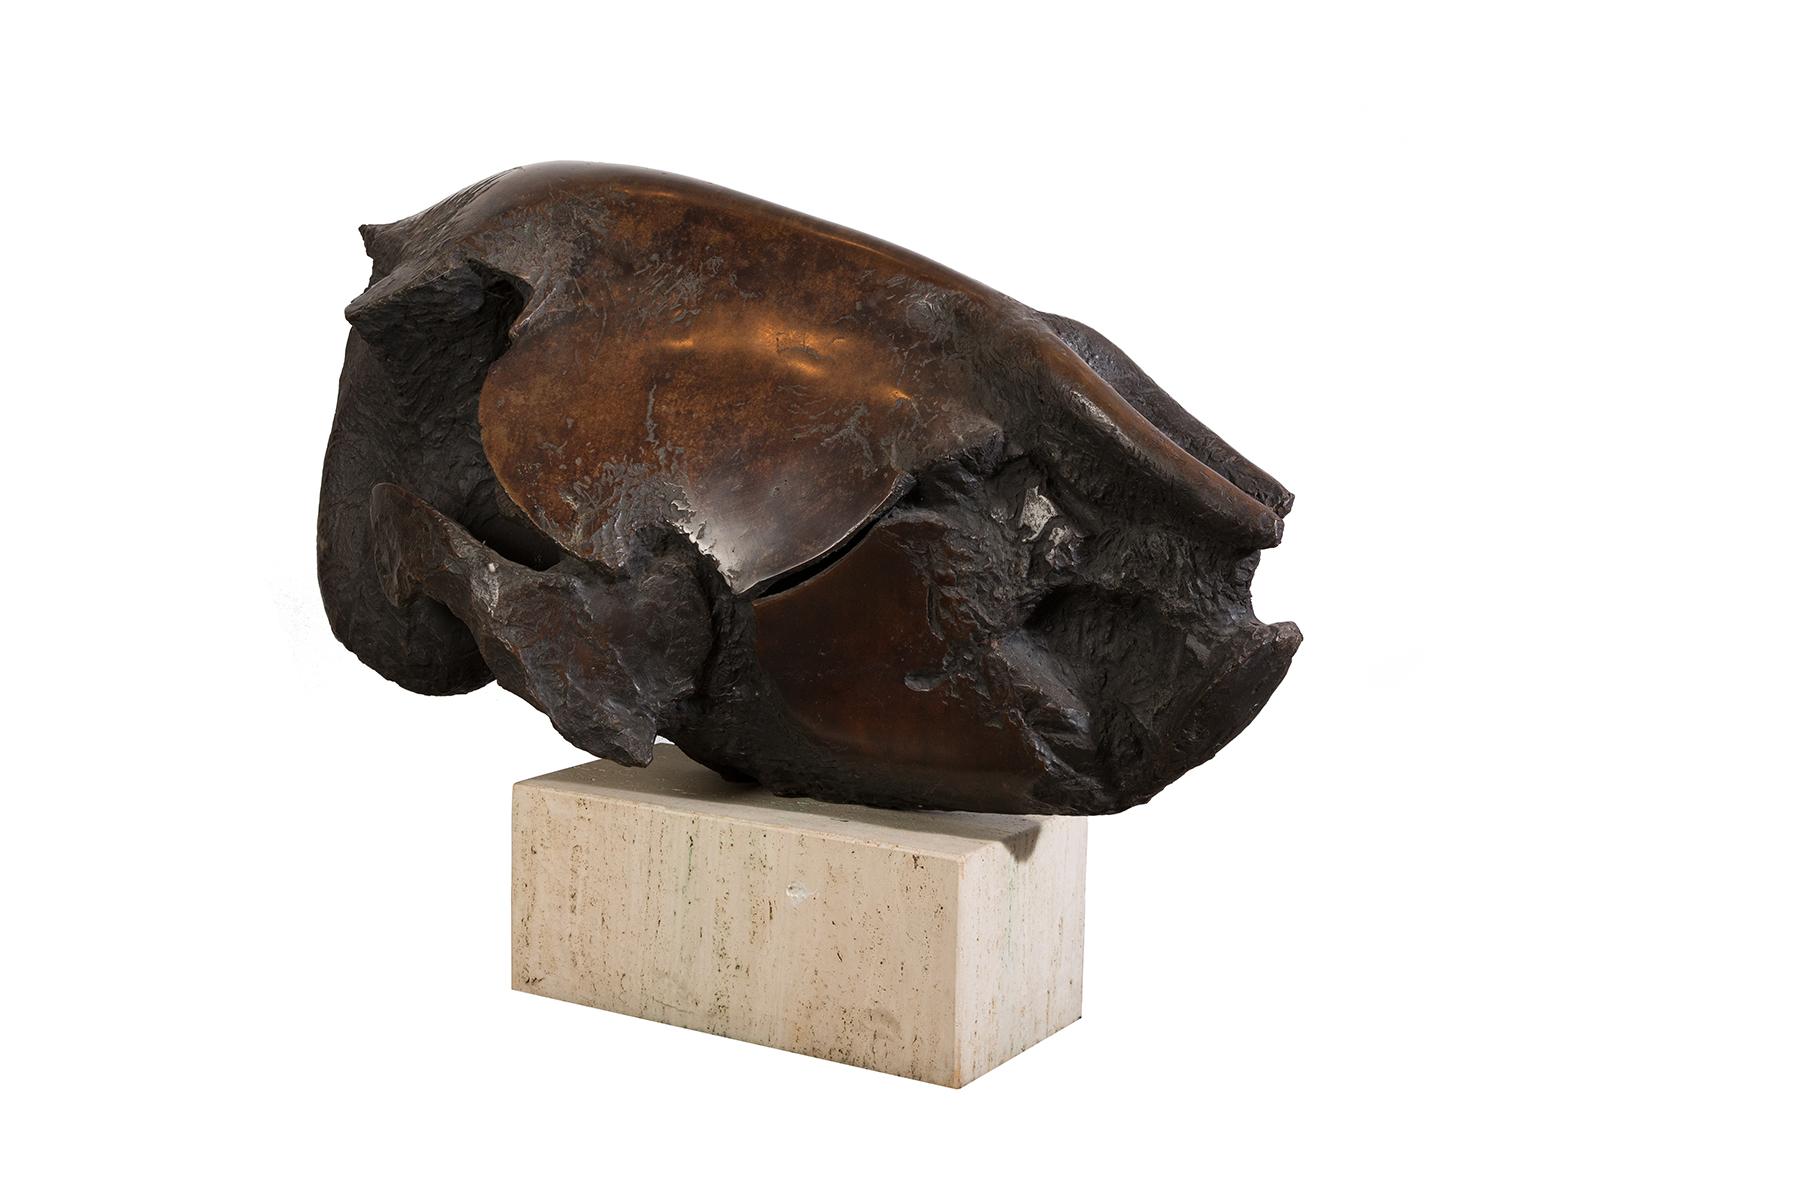 Giant scale bronze ram skull sculpture on limestone base by California artist Jack Zajac.

West-coast based modernist artist Jack Zajac (b. 1929) was best known for works that traversed styles ranging from Surrealism to biomorphism. This monumental